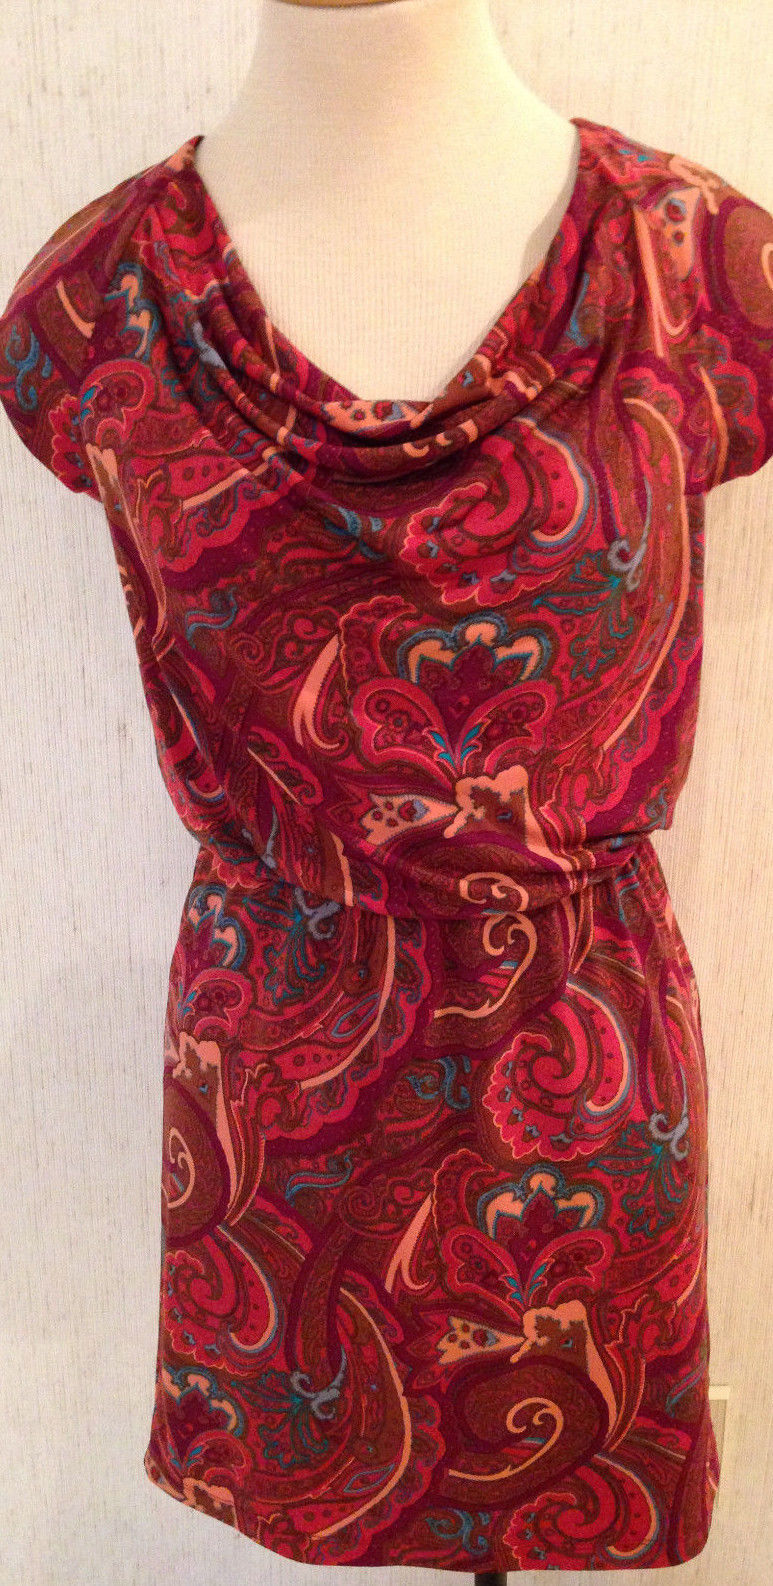 Primary image for Cute NEW JESSICA SIMPSON Washable DRESS Sexy Back Sz S Small 4-6  NWT $118 MSRP